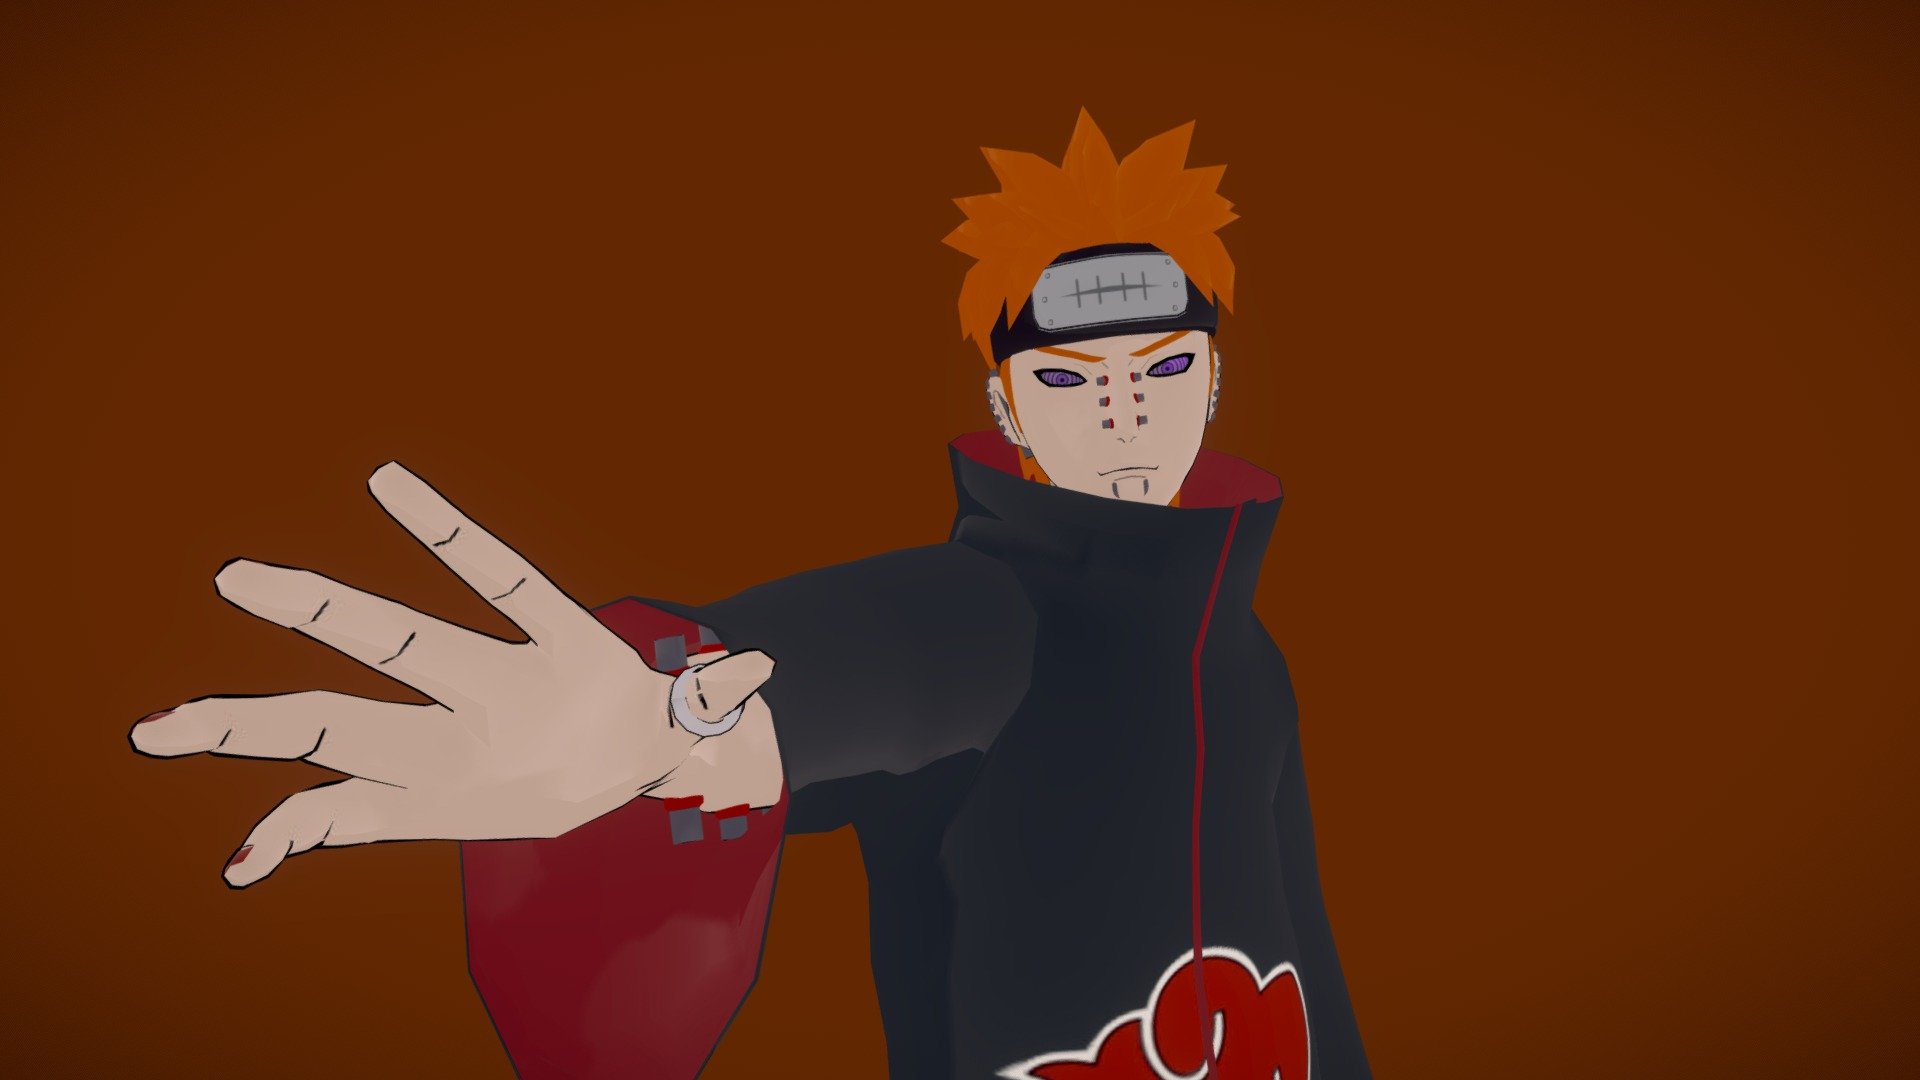 Made on Blender, Mid - High Poly Model, Includes Rig and Face Rig, UV Maps and it's Texture Painted

This is a model of Pain(Tendo) from Naruto, My goodness, this guy took a while to finish, mainly because of college but it's finally done, I wanted to make a model of this character for a while and decided that this would be the one to throw myself into learning how to rig a face. Granted it can get better, but I think I did a good job for a first try, I didn't want to use Rigify mainly to learn the process myself. Anyways I'm happy how it came out, That face and coat rig were a Pain in the butt if you catch my drift lol.

https://www.artstation.com/artwork/OmV24k

No animation for now. But one will come soon.

Triangles: 23k+ (27k+ with Robe)
Time: Too much to count (thanks college) - Pain (Naruto) - 3D model by maisth 3d model